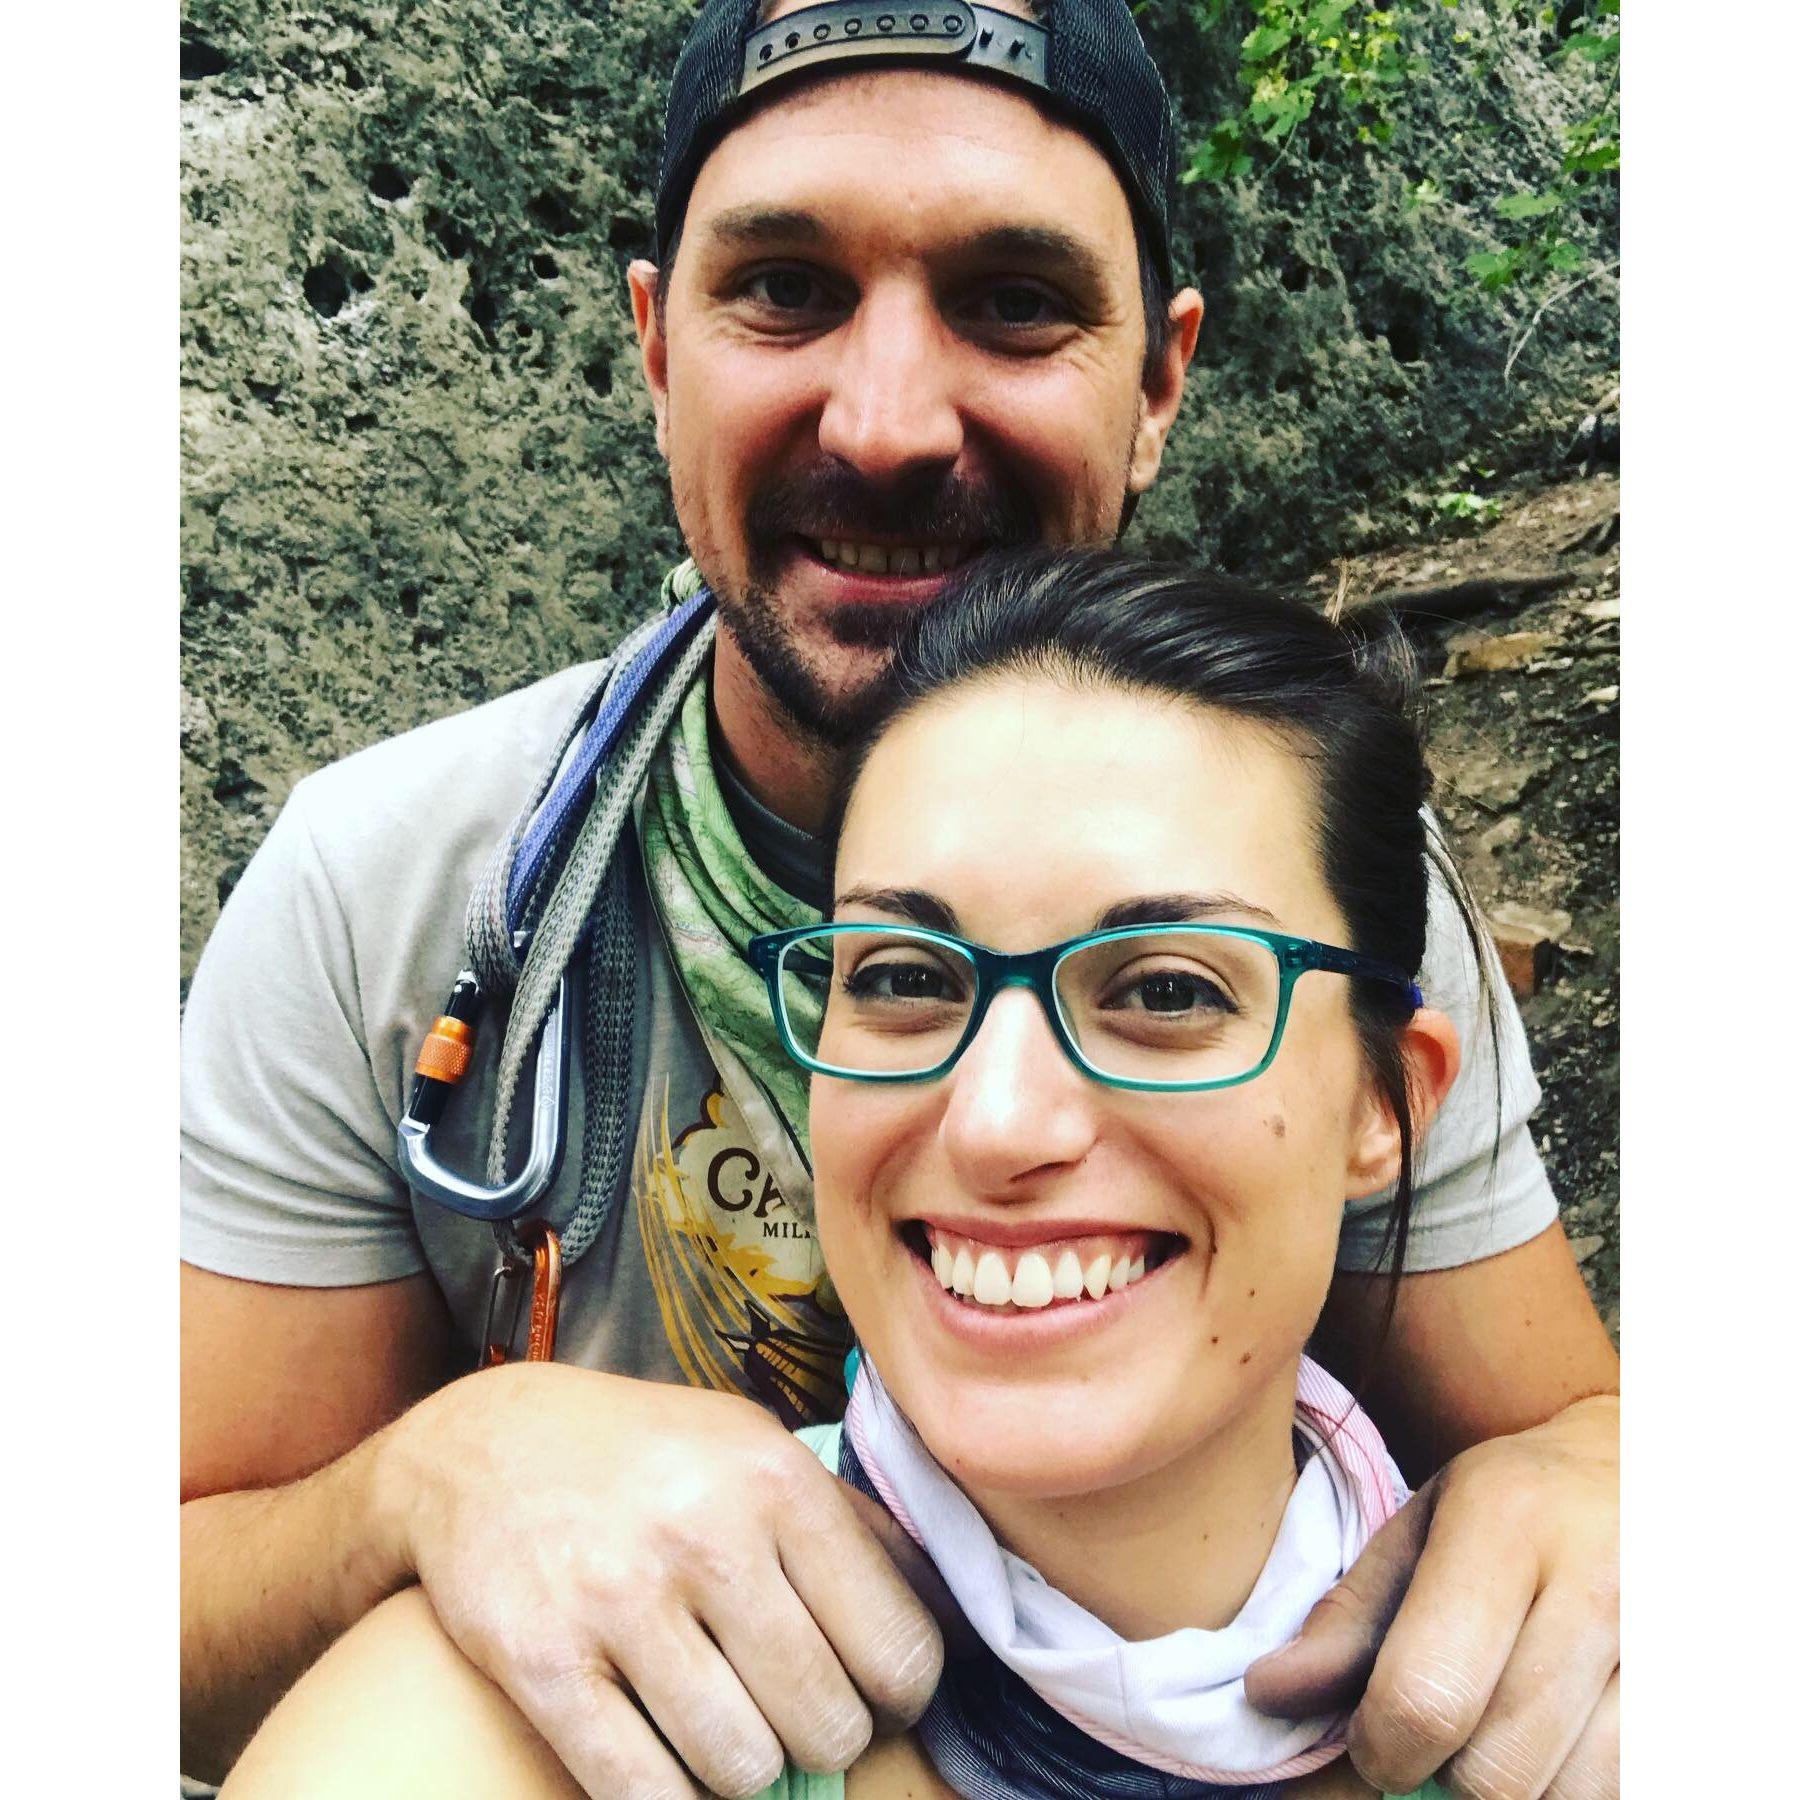 Cyril took Jenn on her first outdoor climbing adventure in Lander, WY for the International Climbers' Festival.